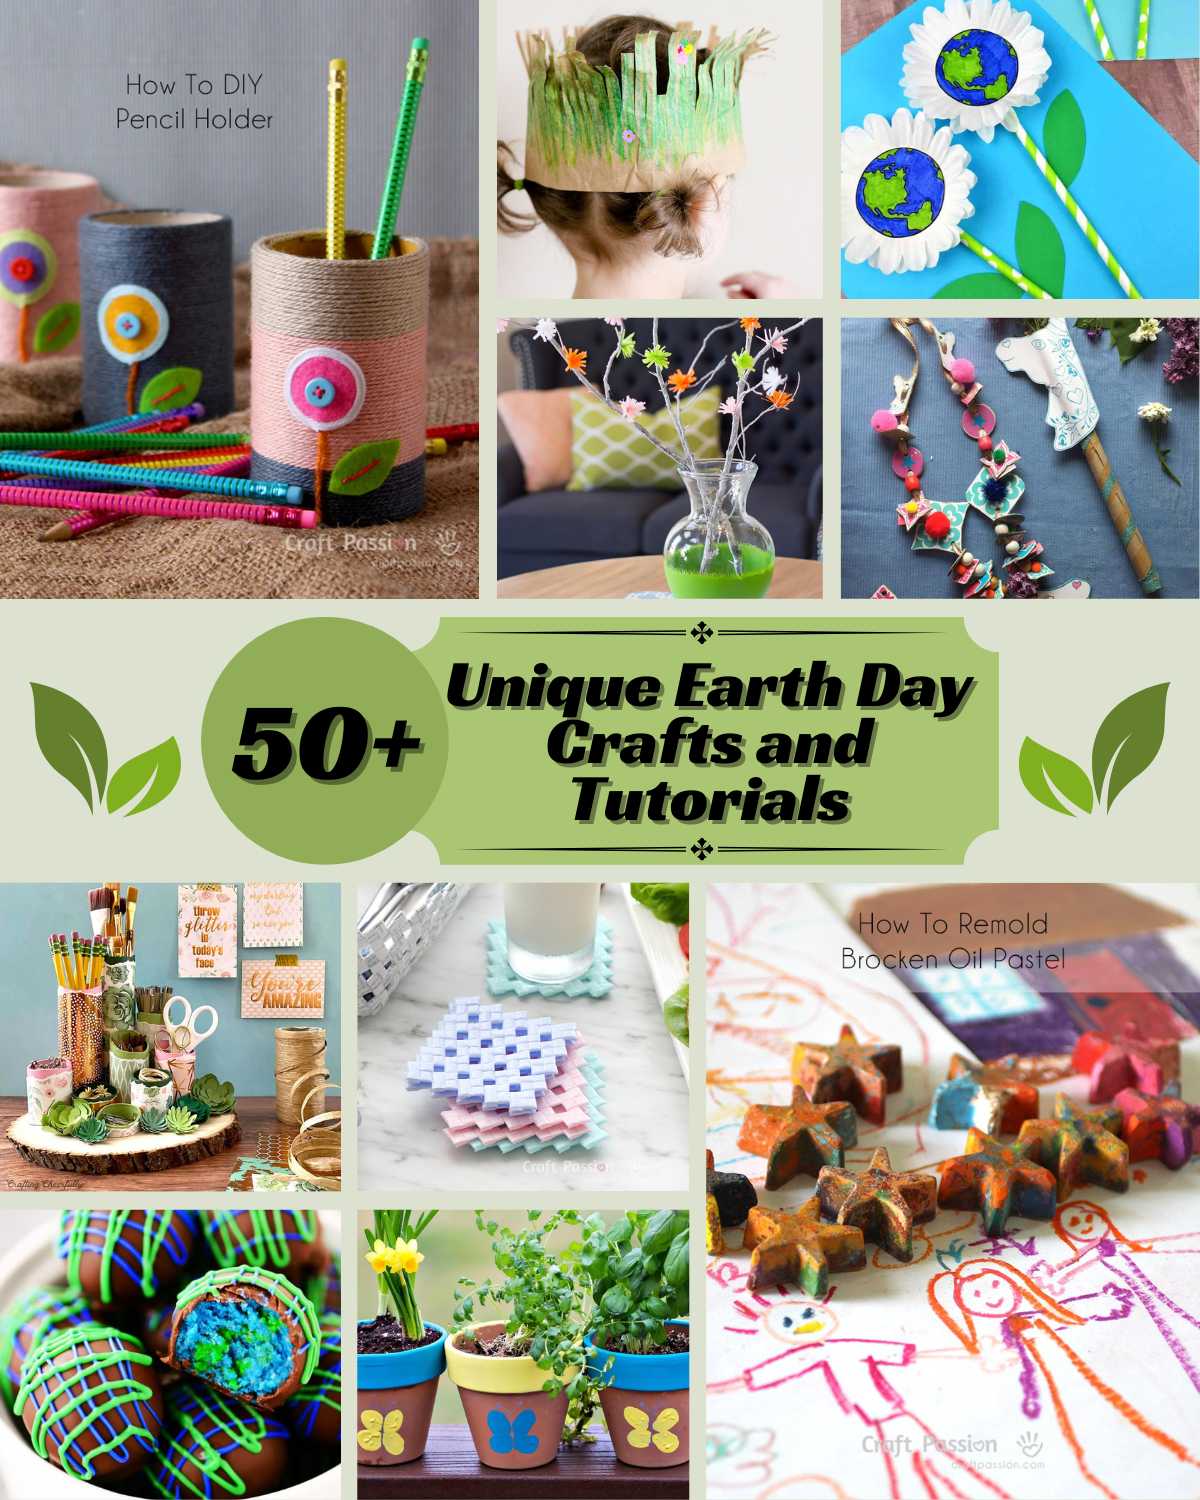 55 Unique Earth Day Crafts and Tutorials • Craft Passion